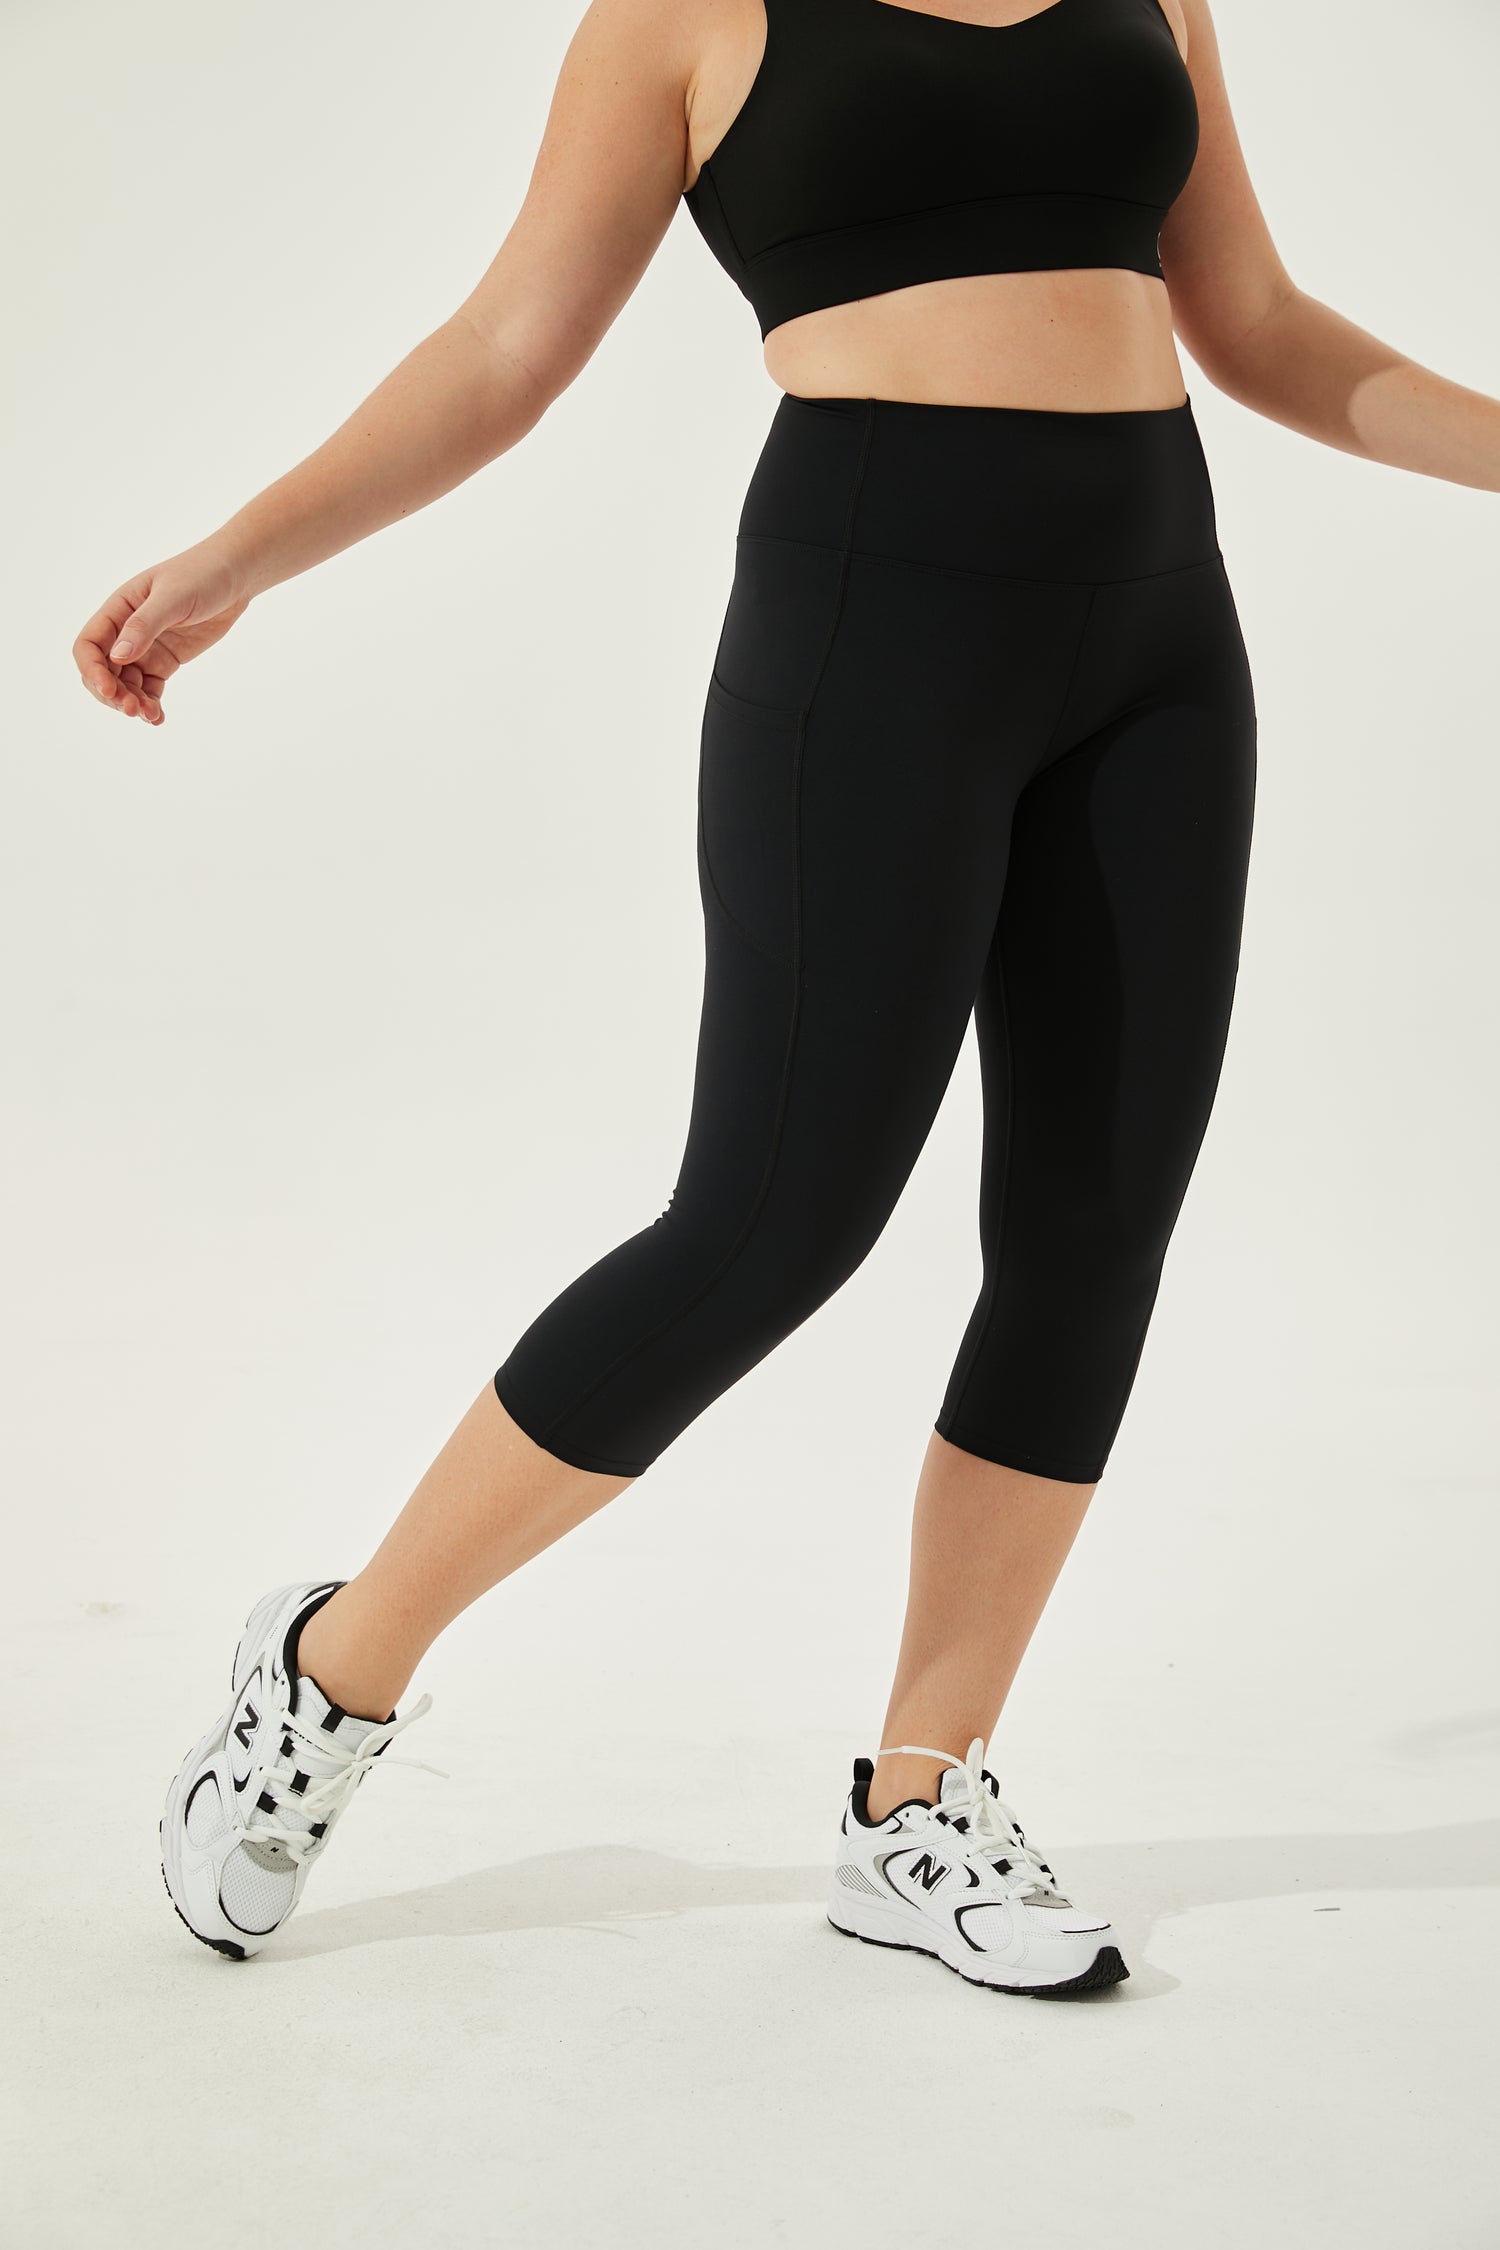 High-Waist 7/8 Buttery Soft & Cooling Camel-Toe Proof Courage Leggings With 3 Pockets